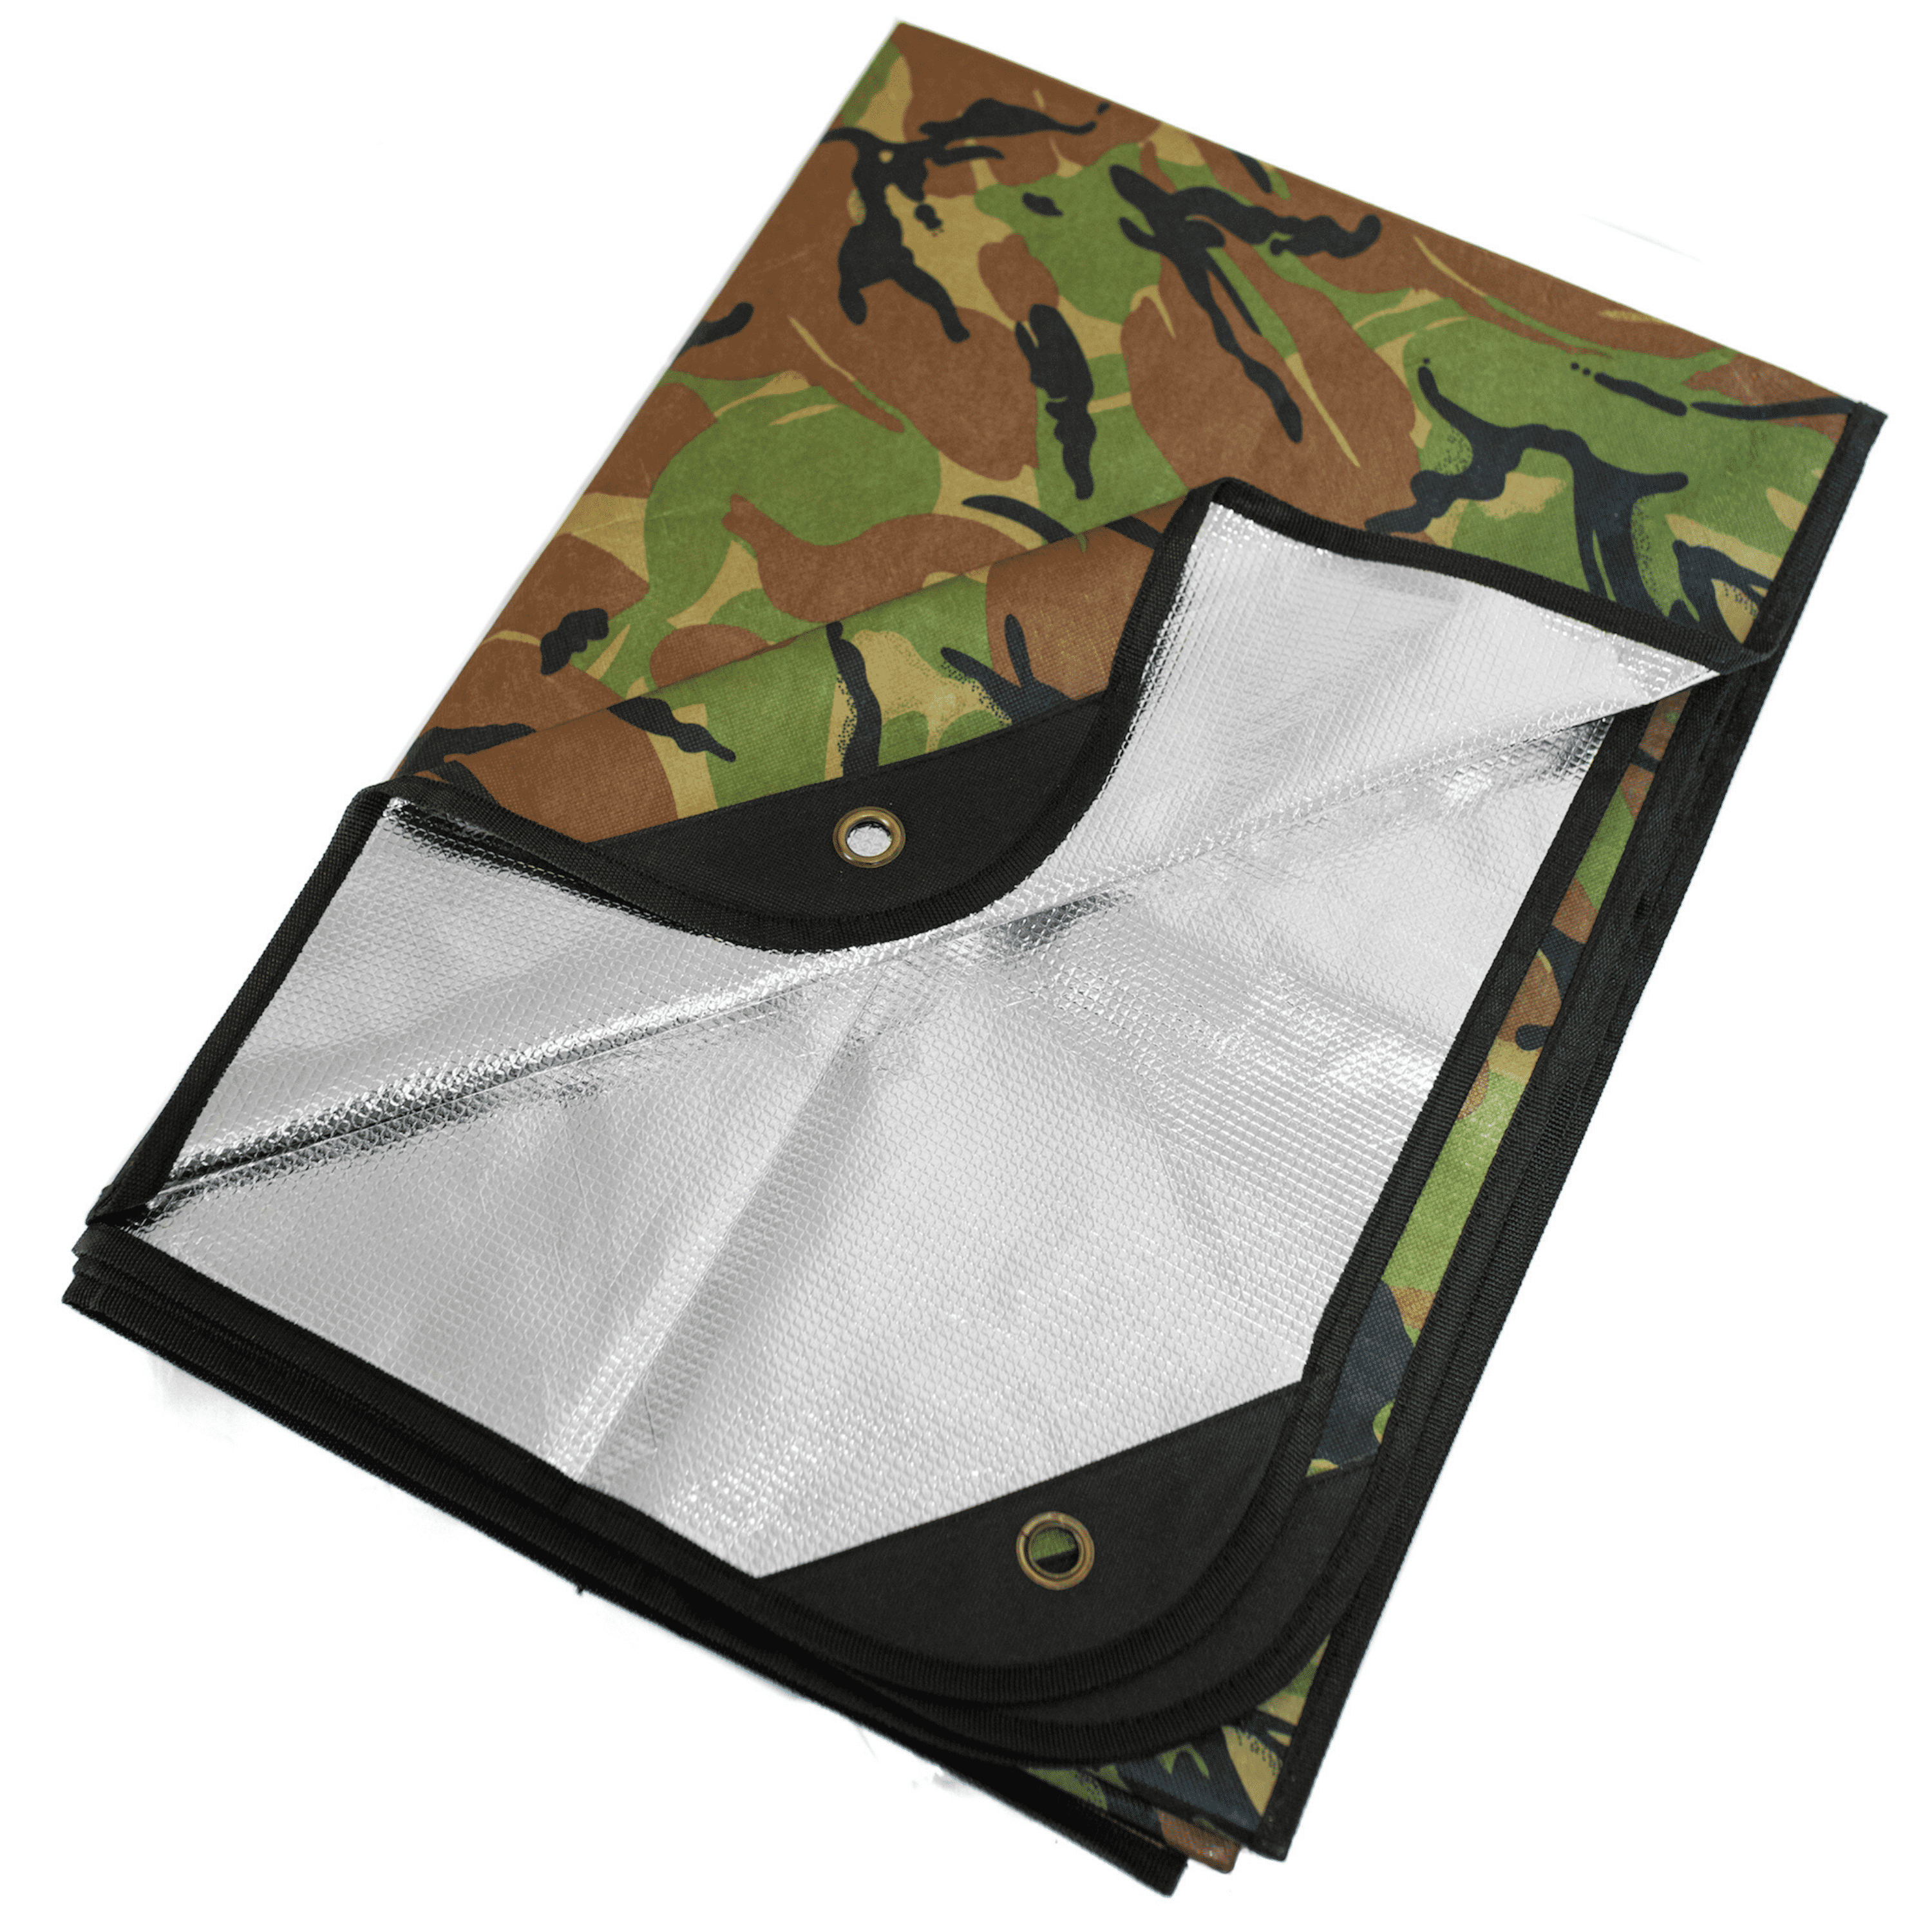 Ultra Emergency Survival Blanket Heavy Duty Reflective Tarp Size:51*82''-130*210CM,Color:10 packs Silver Thermal Outdoor Waterproof Reusable Heat Retention Extra Large Space Blankets for Camping Hik